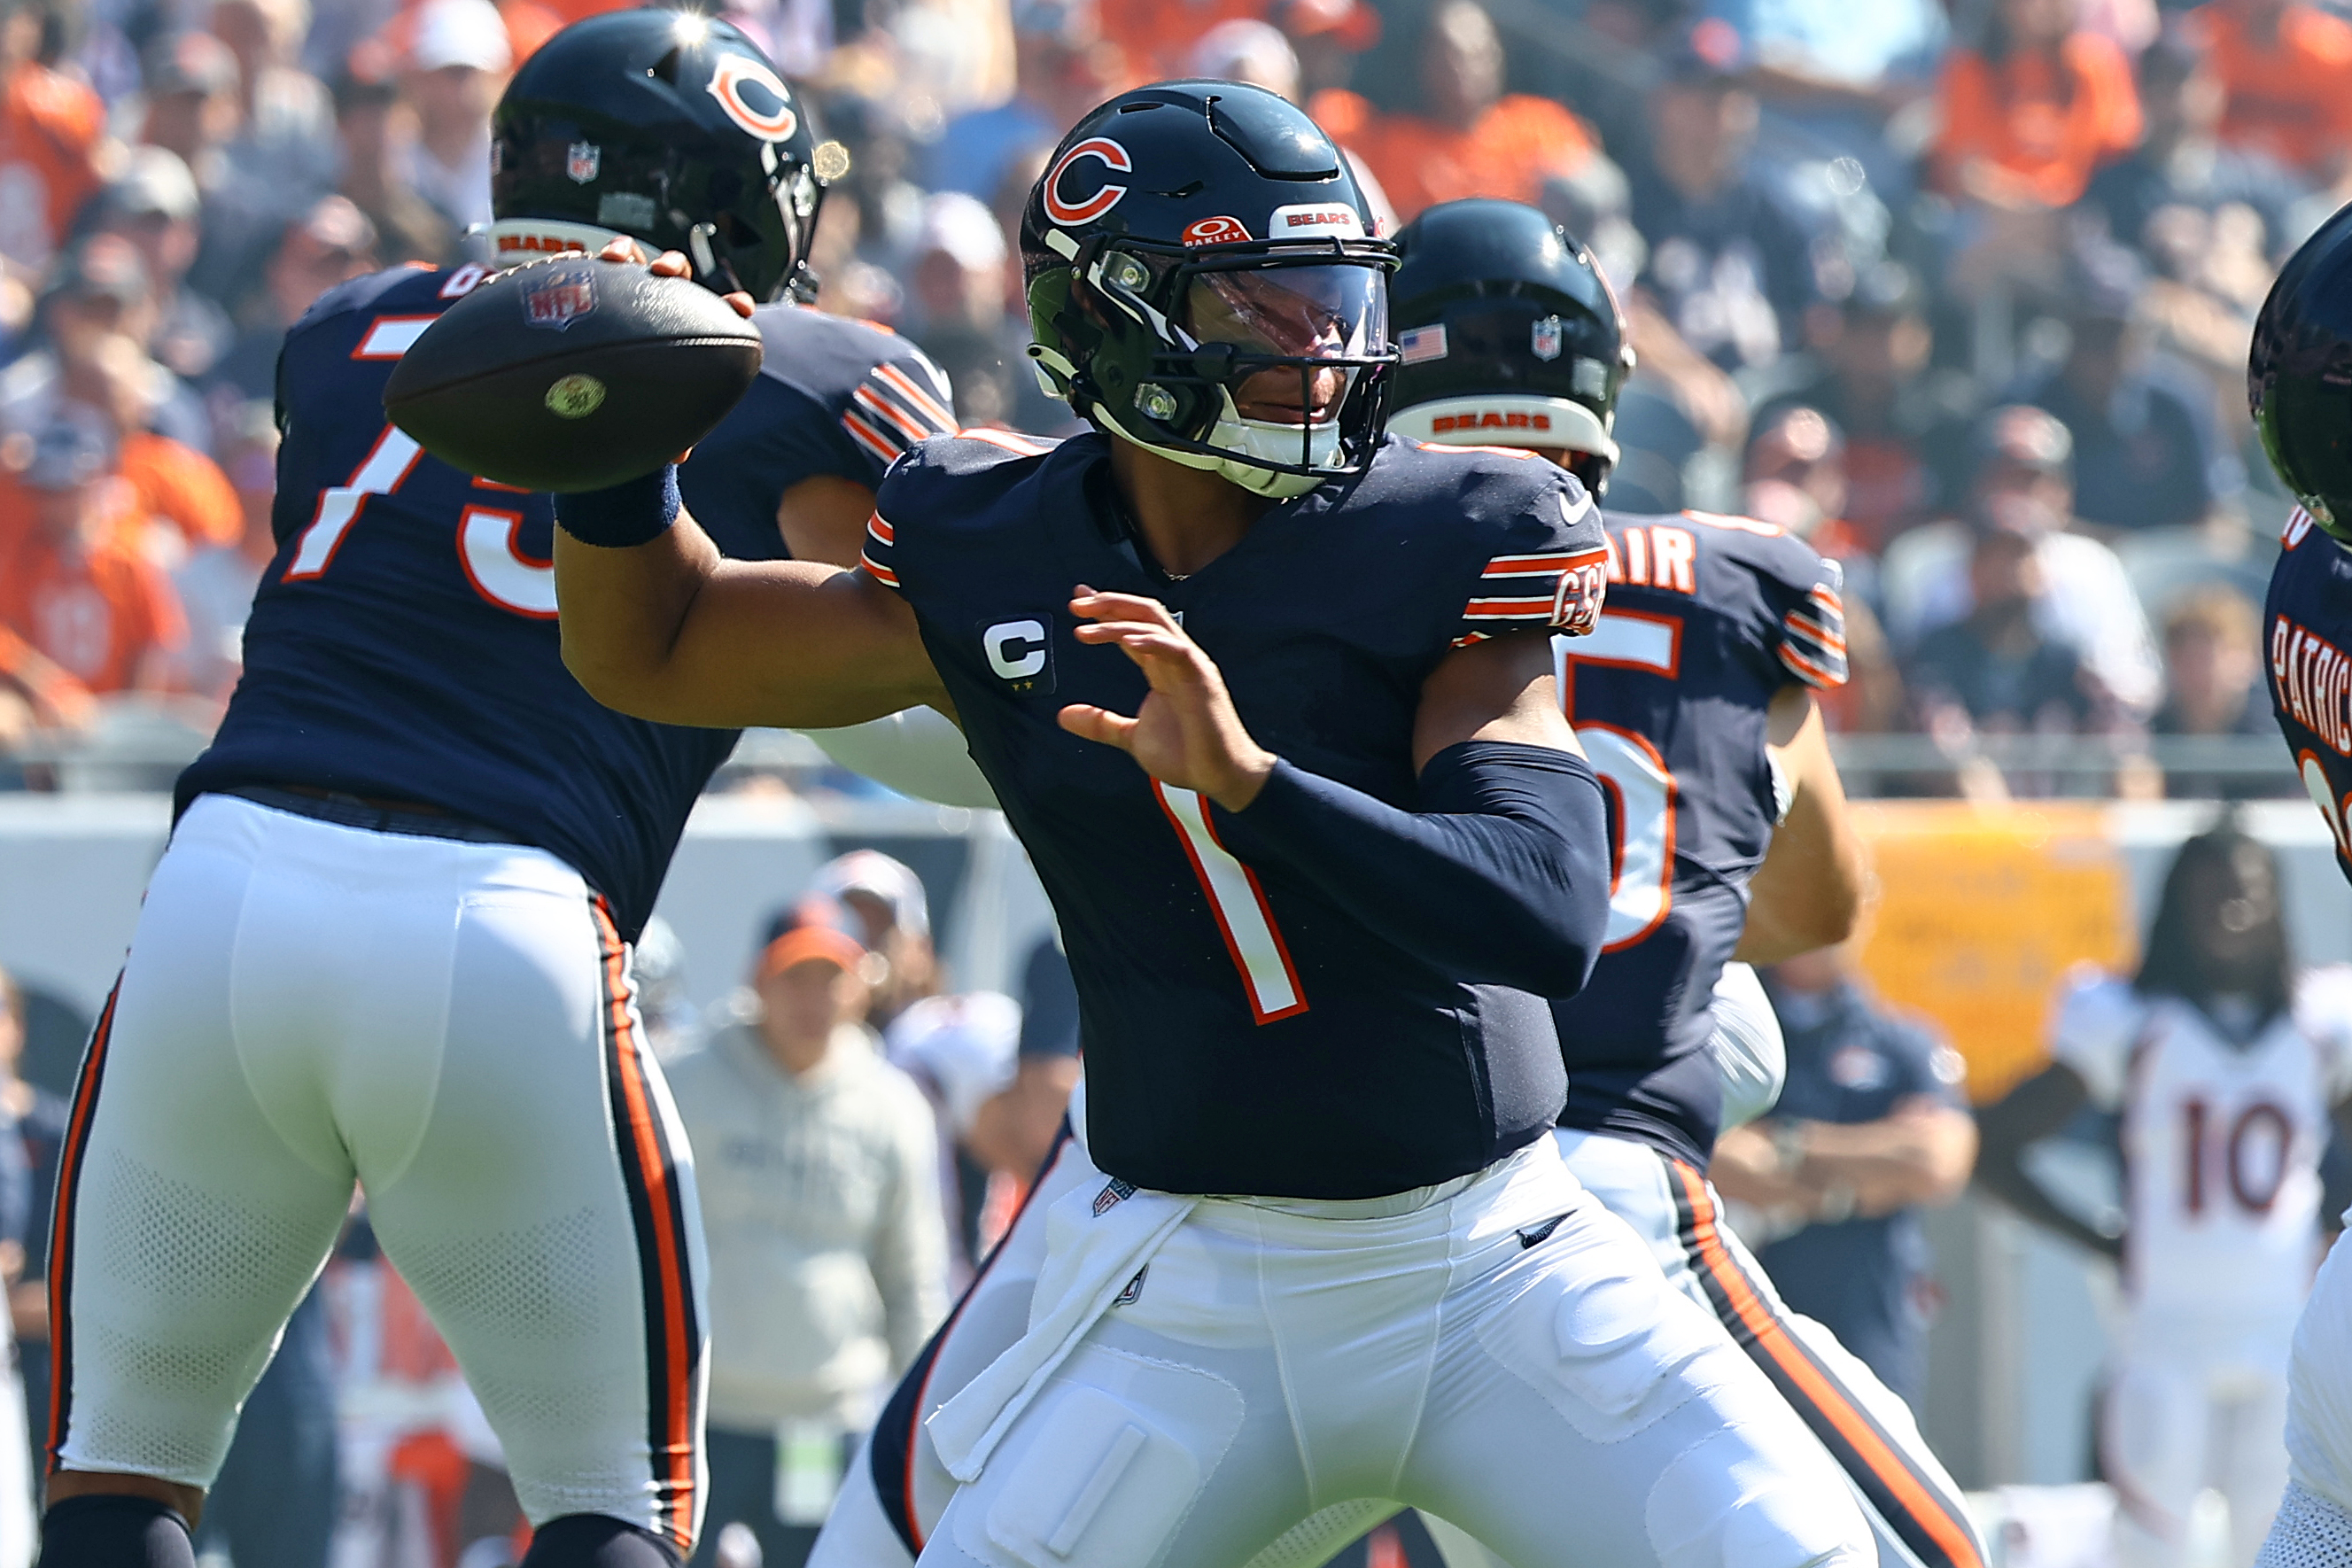 Chicago Bears quarterback Justin Fields throwing a pass against the Denver Broncos.